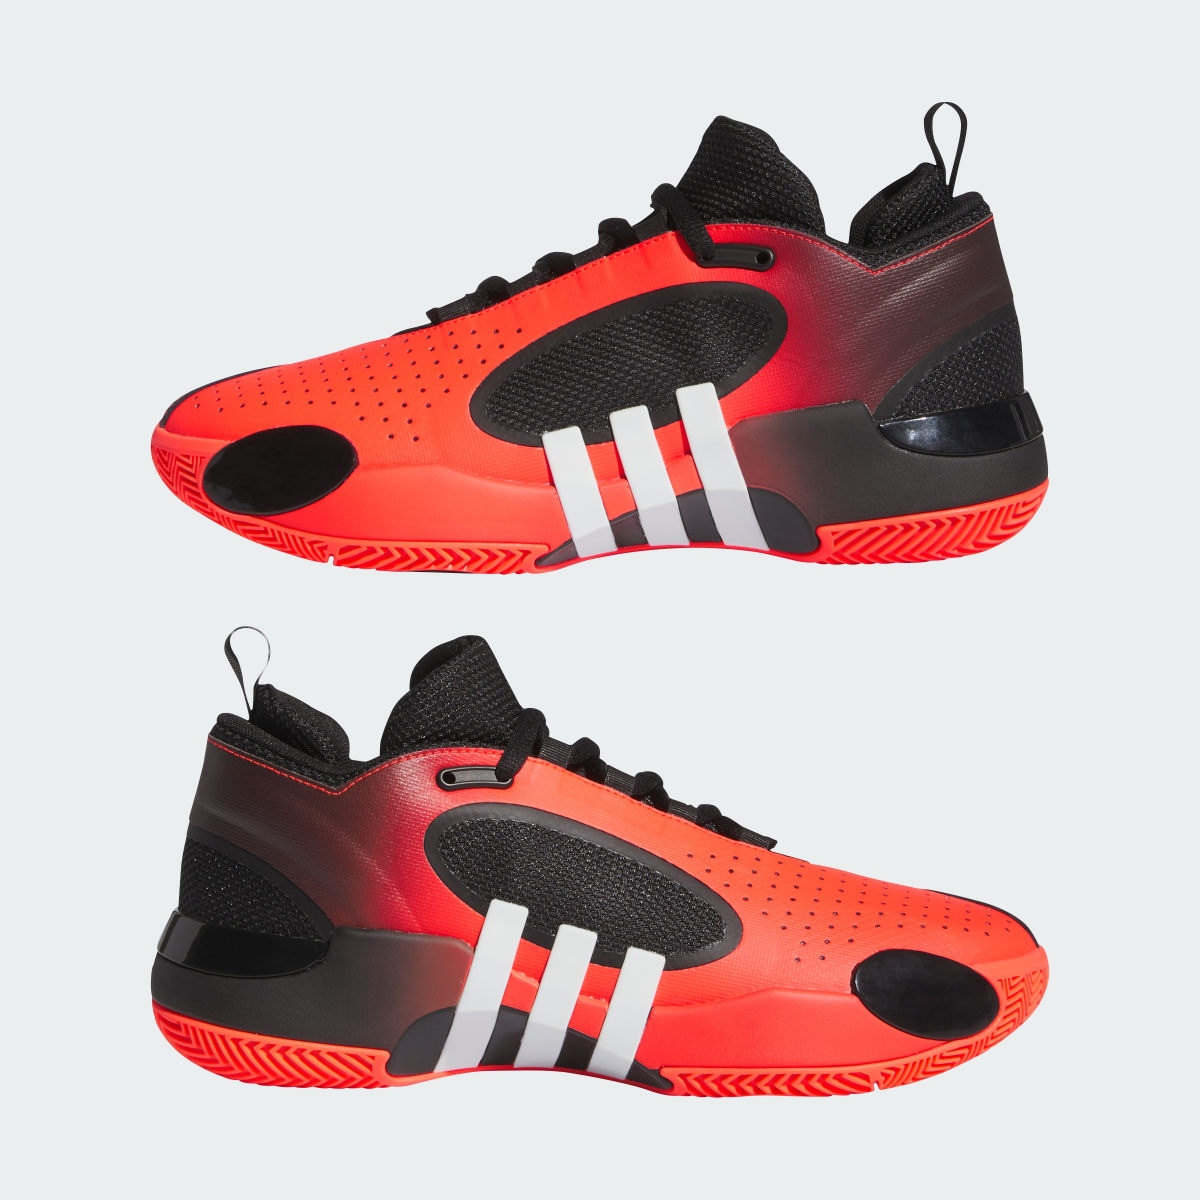 Adidas D.O.N. Issue 5 Shoes. 8